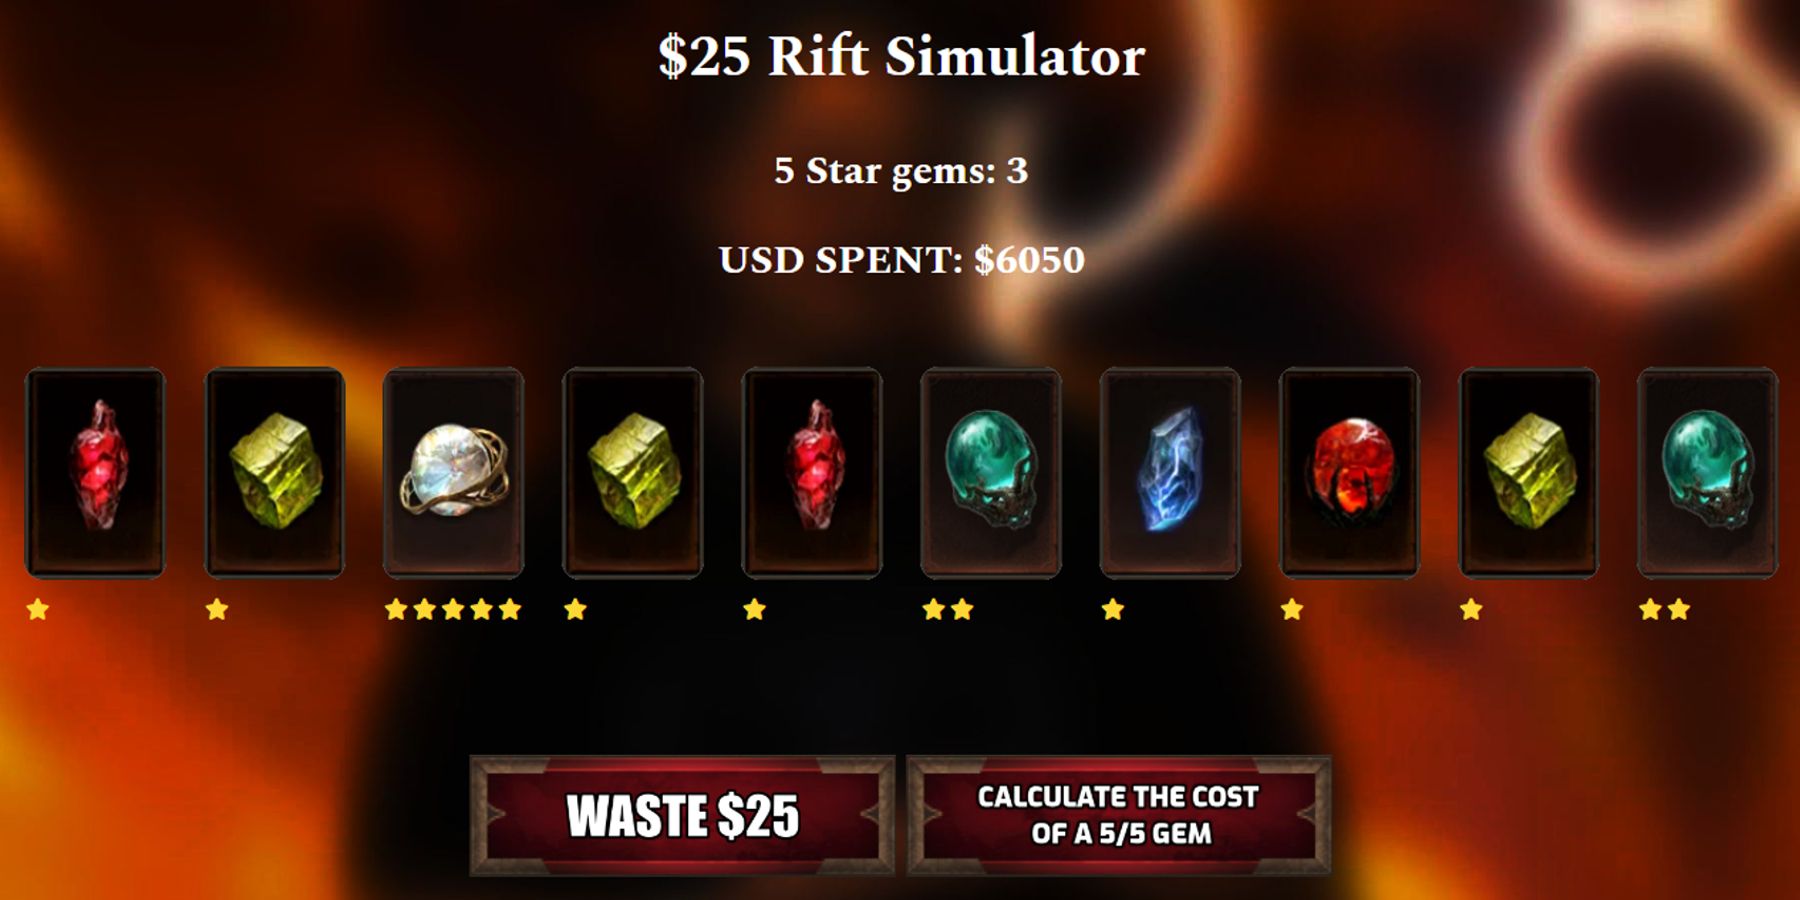 in diablo 3 if you sell an item socketed with a legendary gem, do you lose the legendary gem